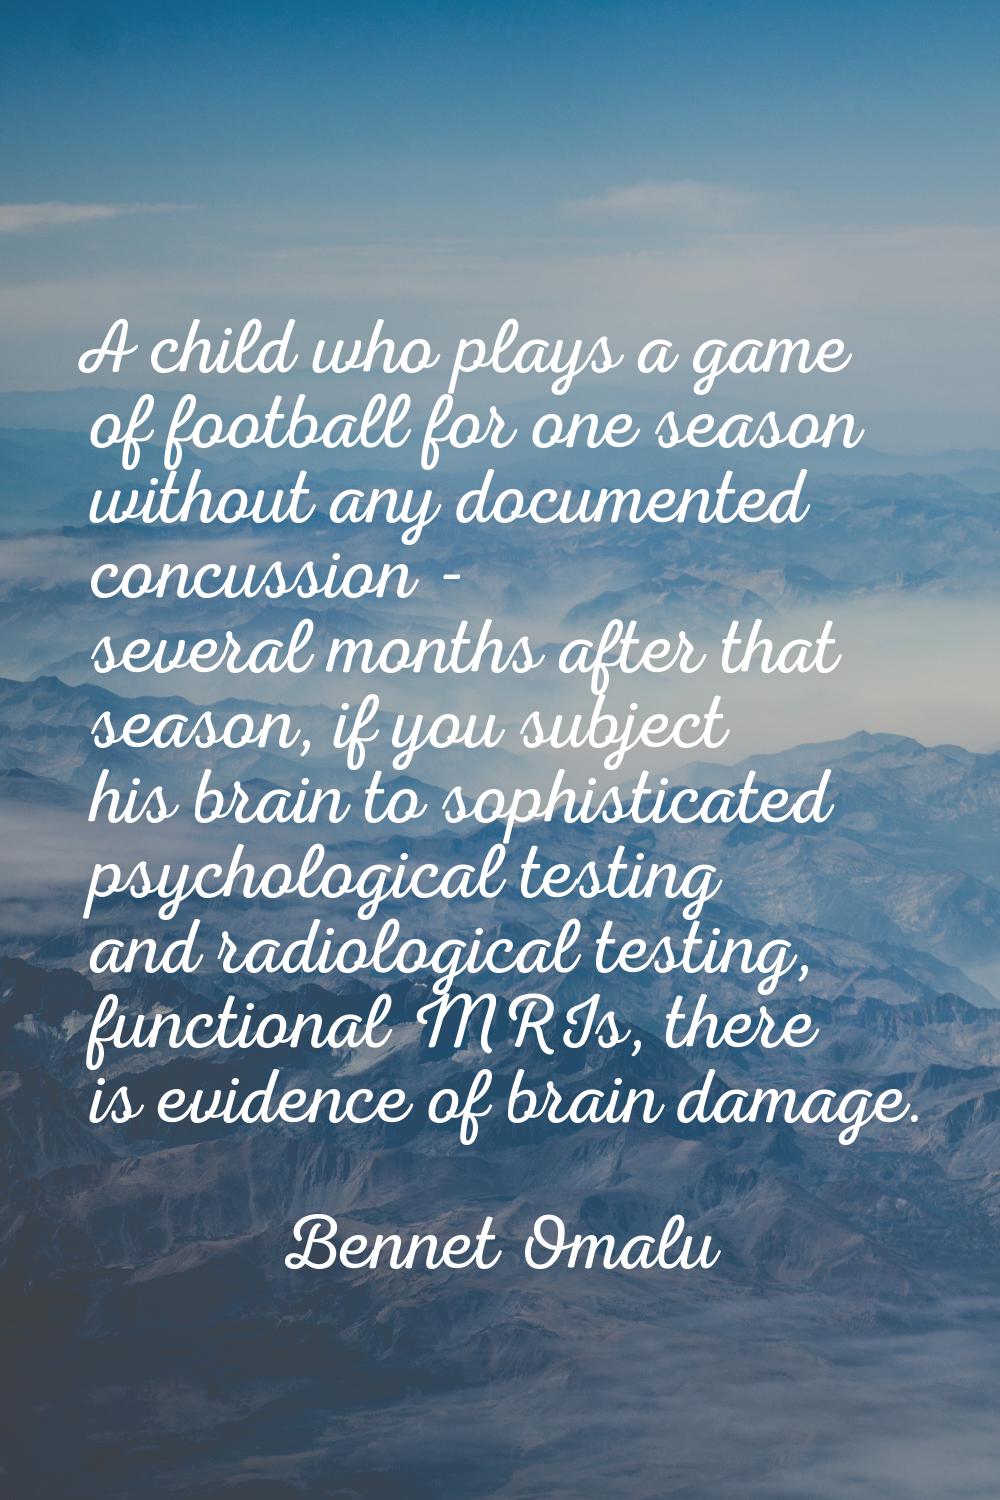 A child who plays a game of football for one season without any documented concussion - several mon